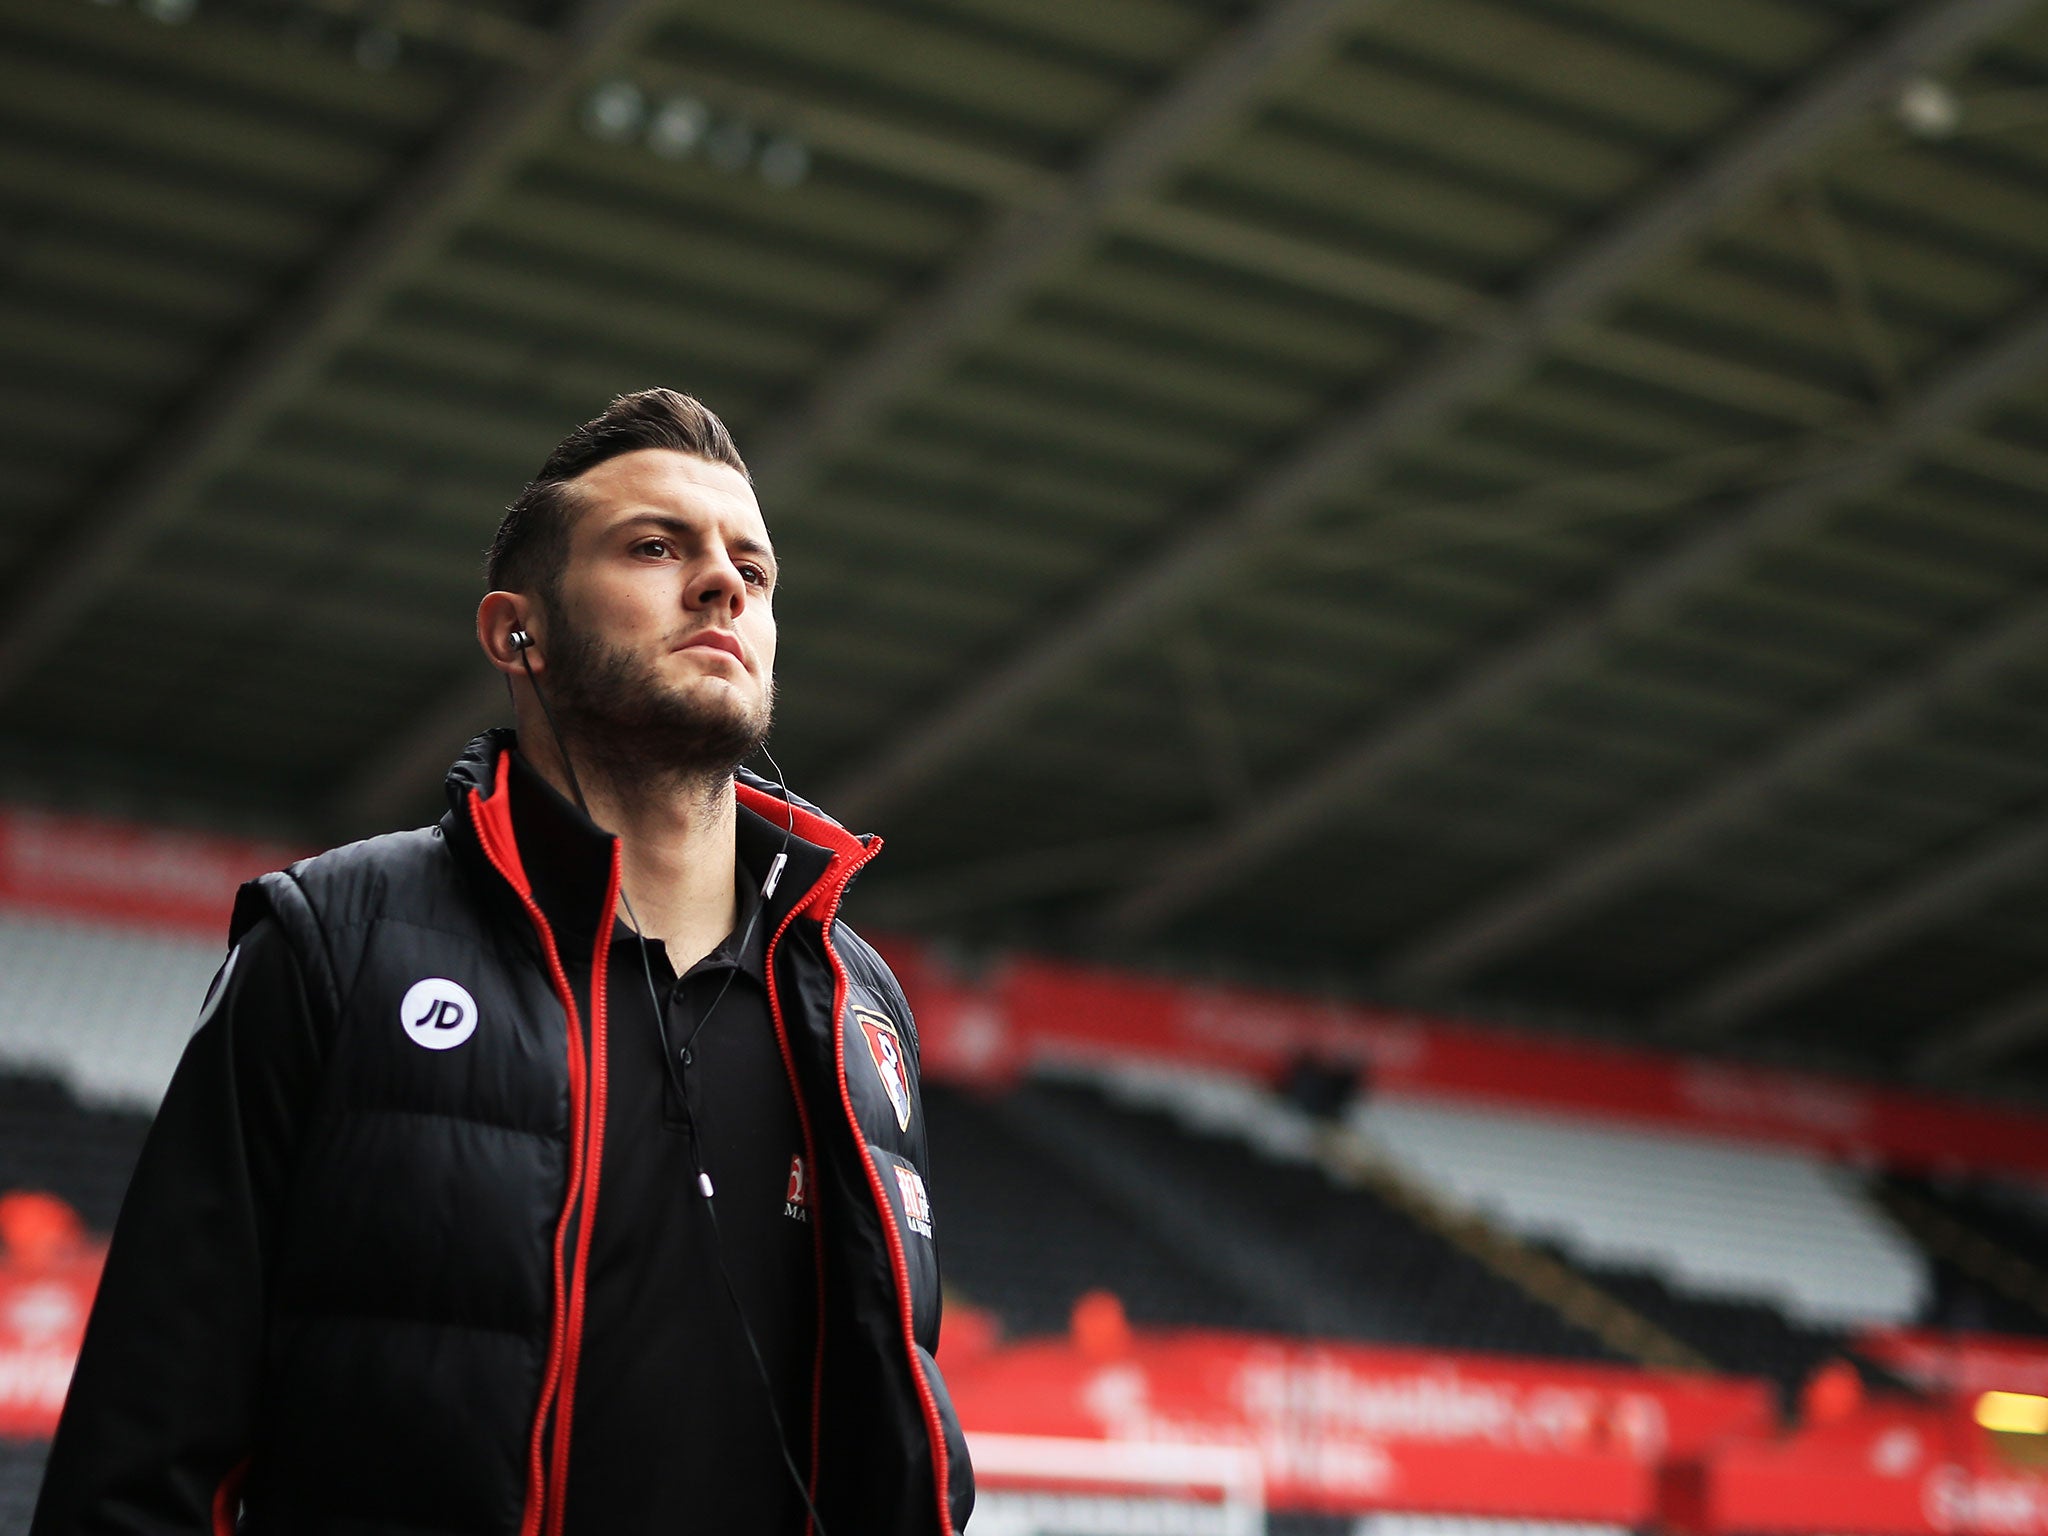 Jack Wilshere has thrived at Bournemouth since joining the side last summer